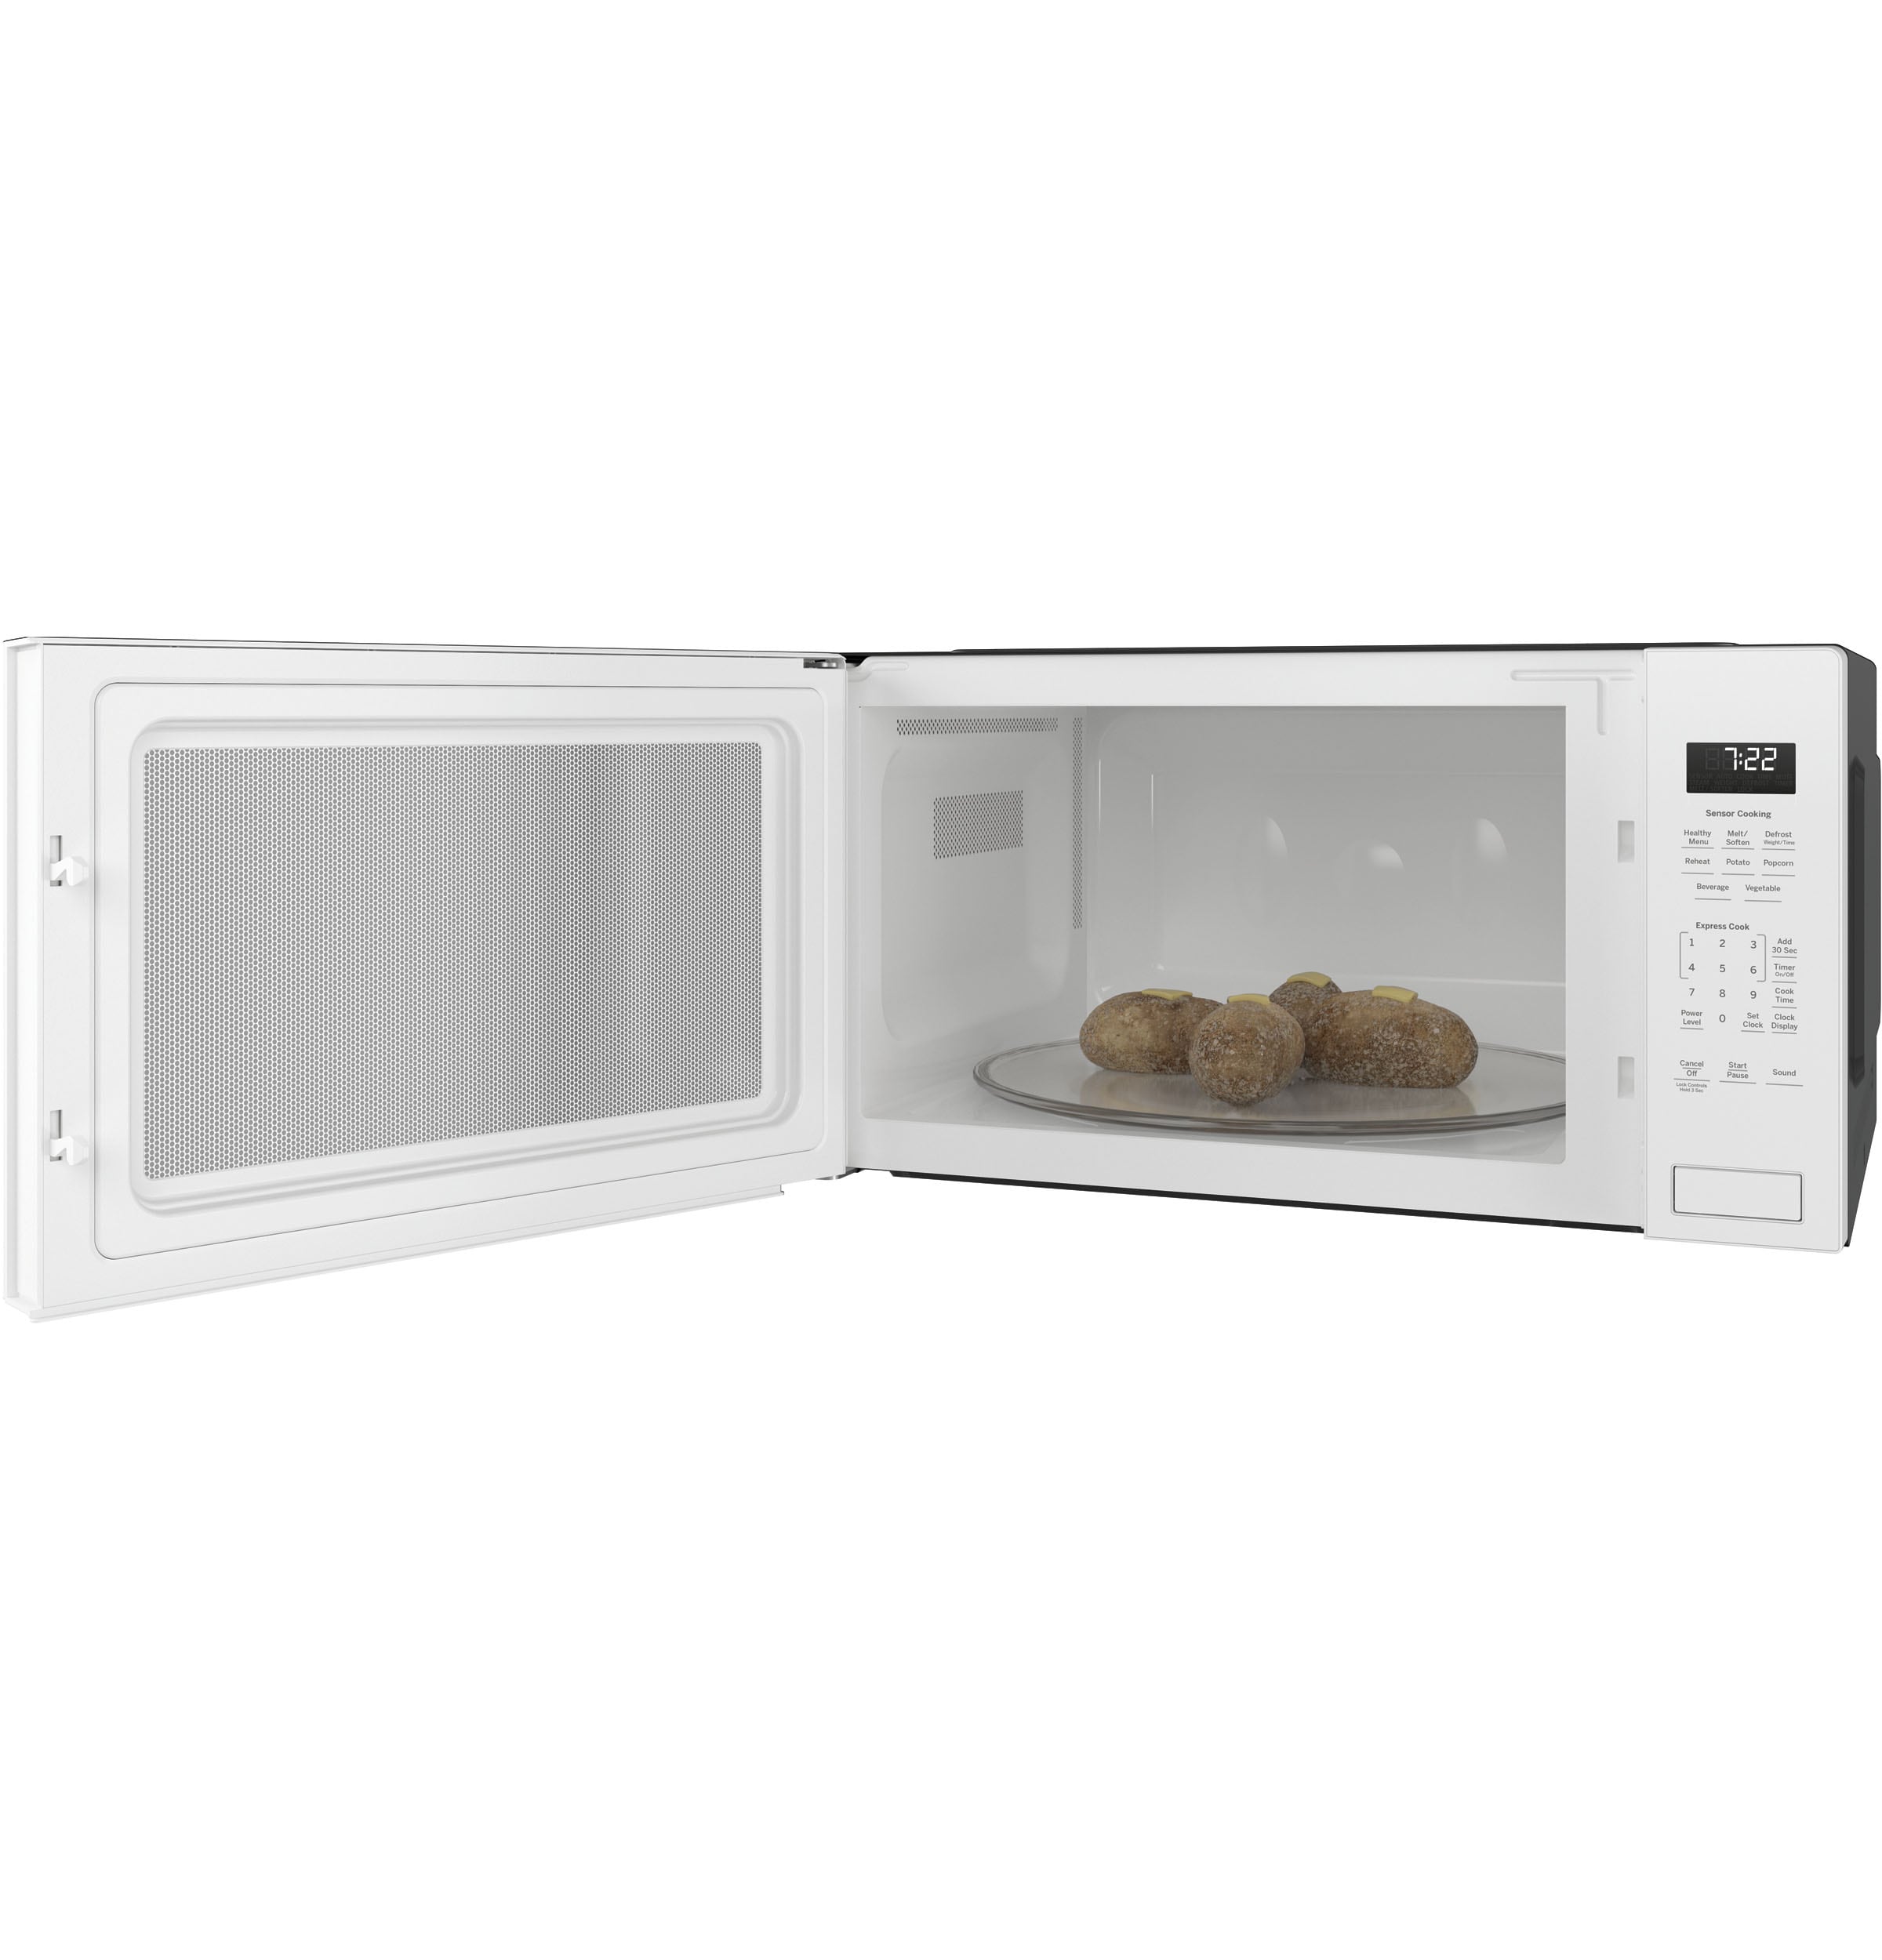 GE PEB2060SMSS 2.0 cu. ft. Countertop Microwave Oven with 1200